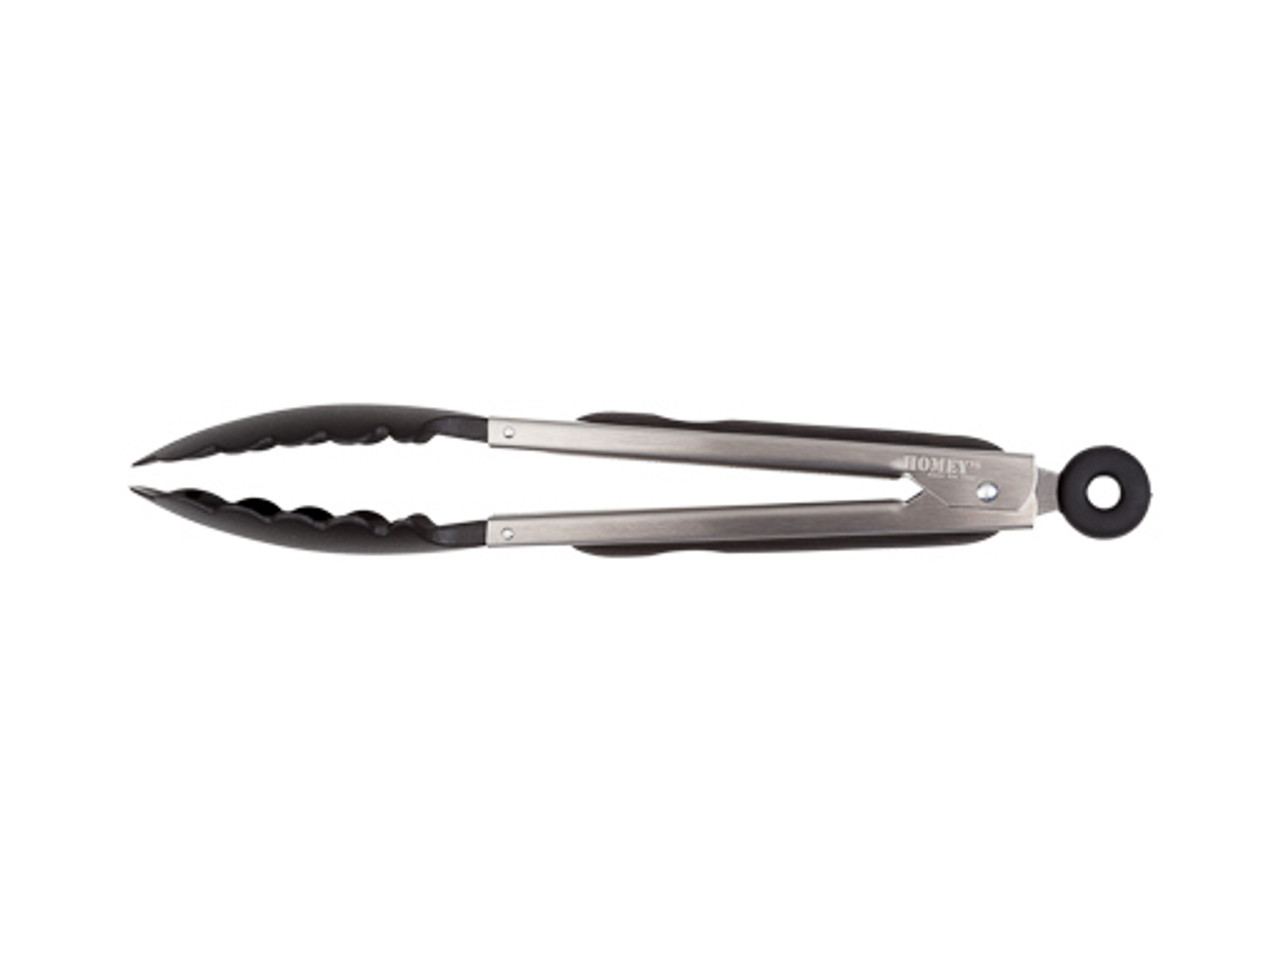 OXO Good Grips Stainless Steel Tongs with Nylon Heads - 9